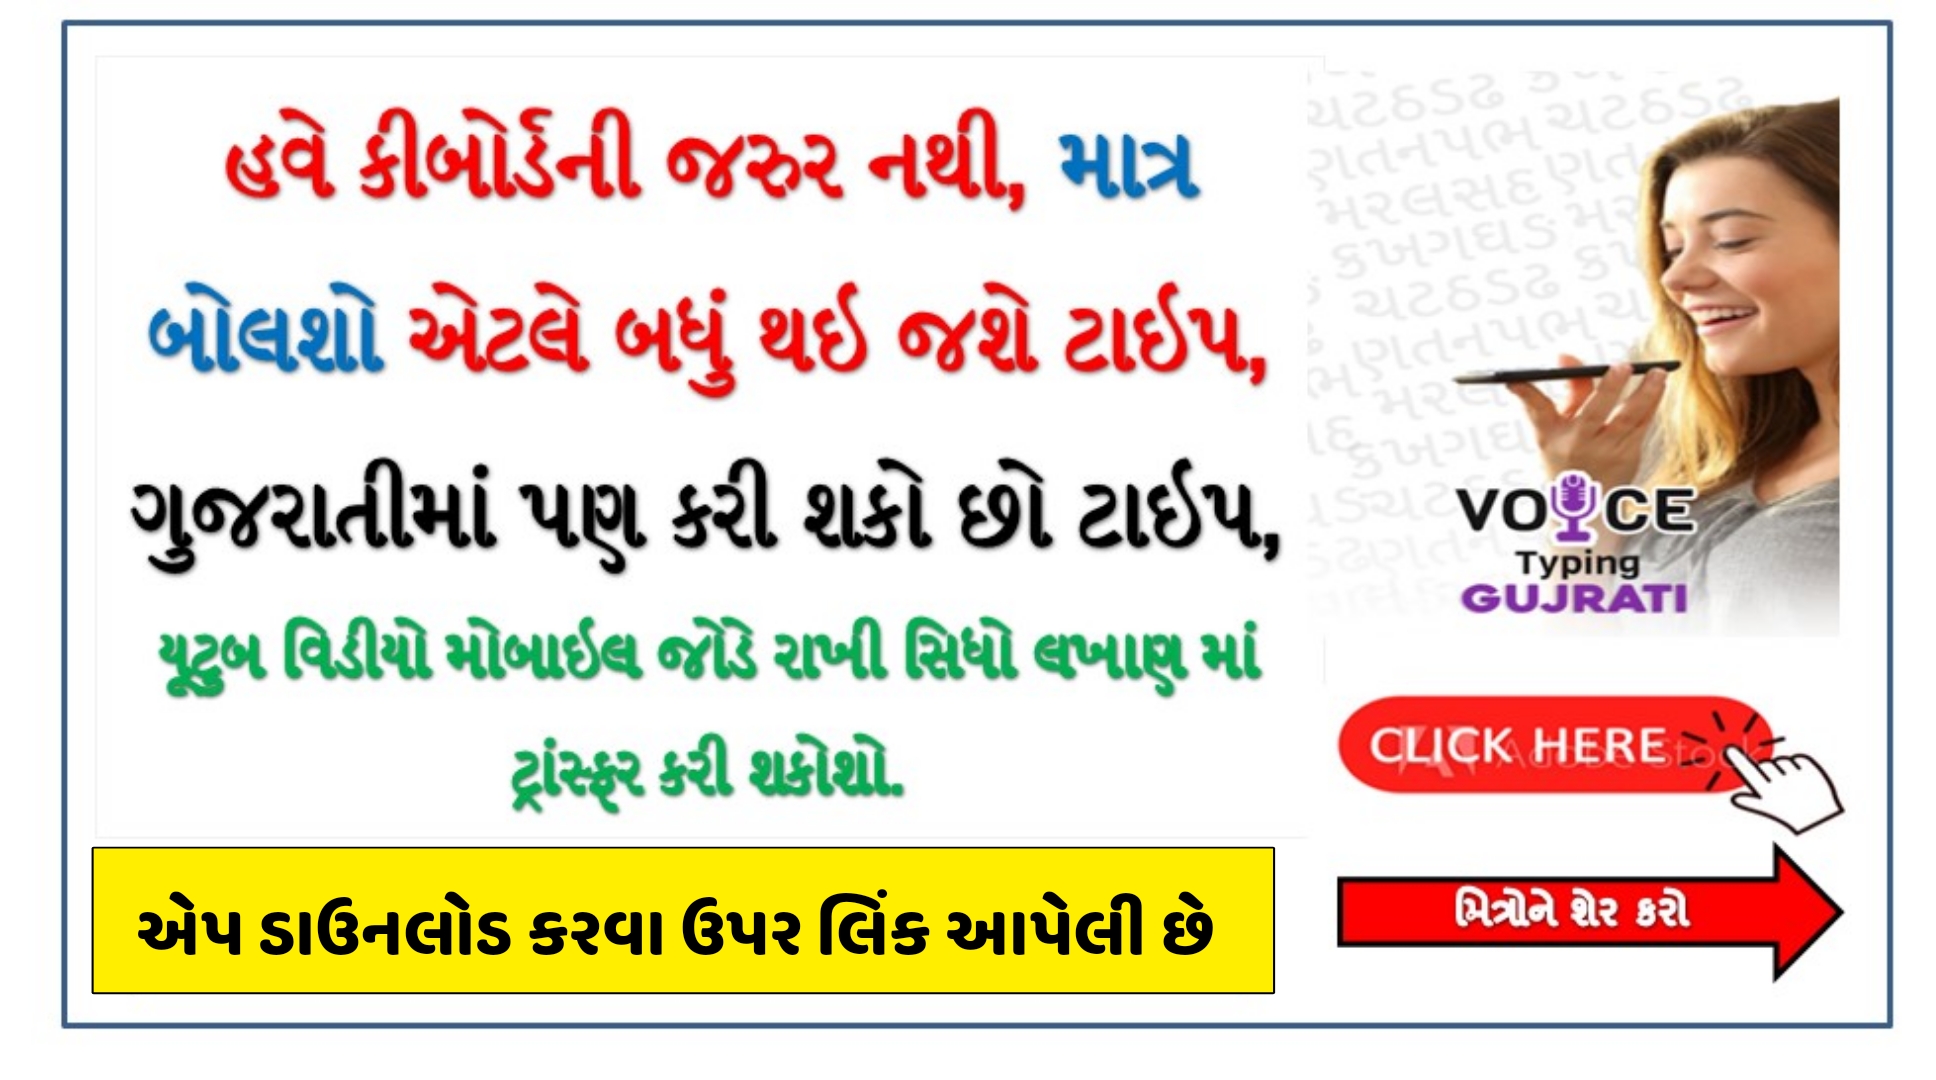 Gujarati Voice Typing And Voice To Text Converter Apps Download. - Digital Gujarat